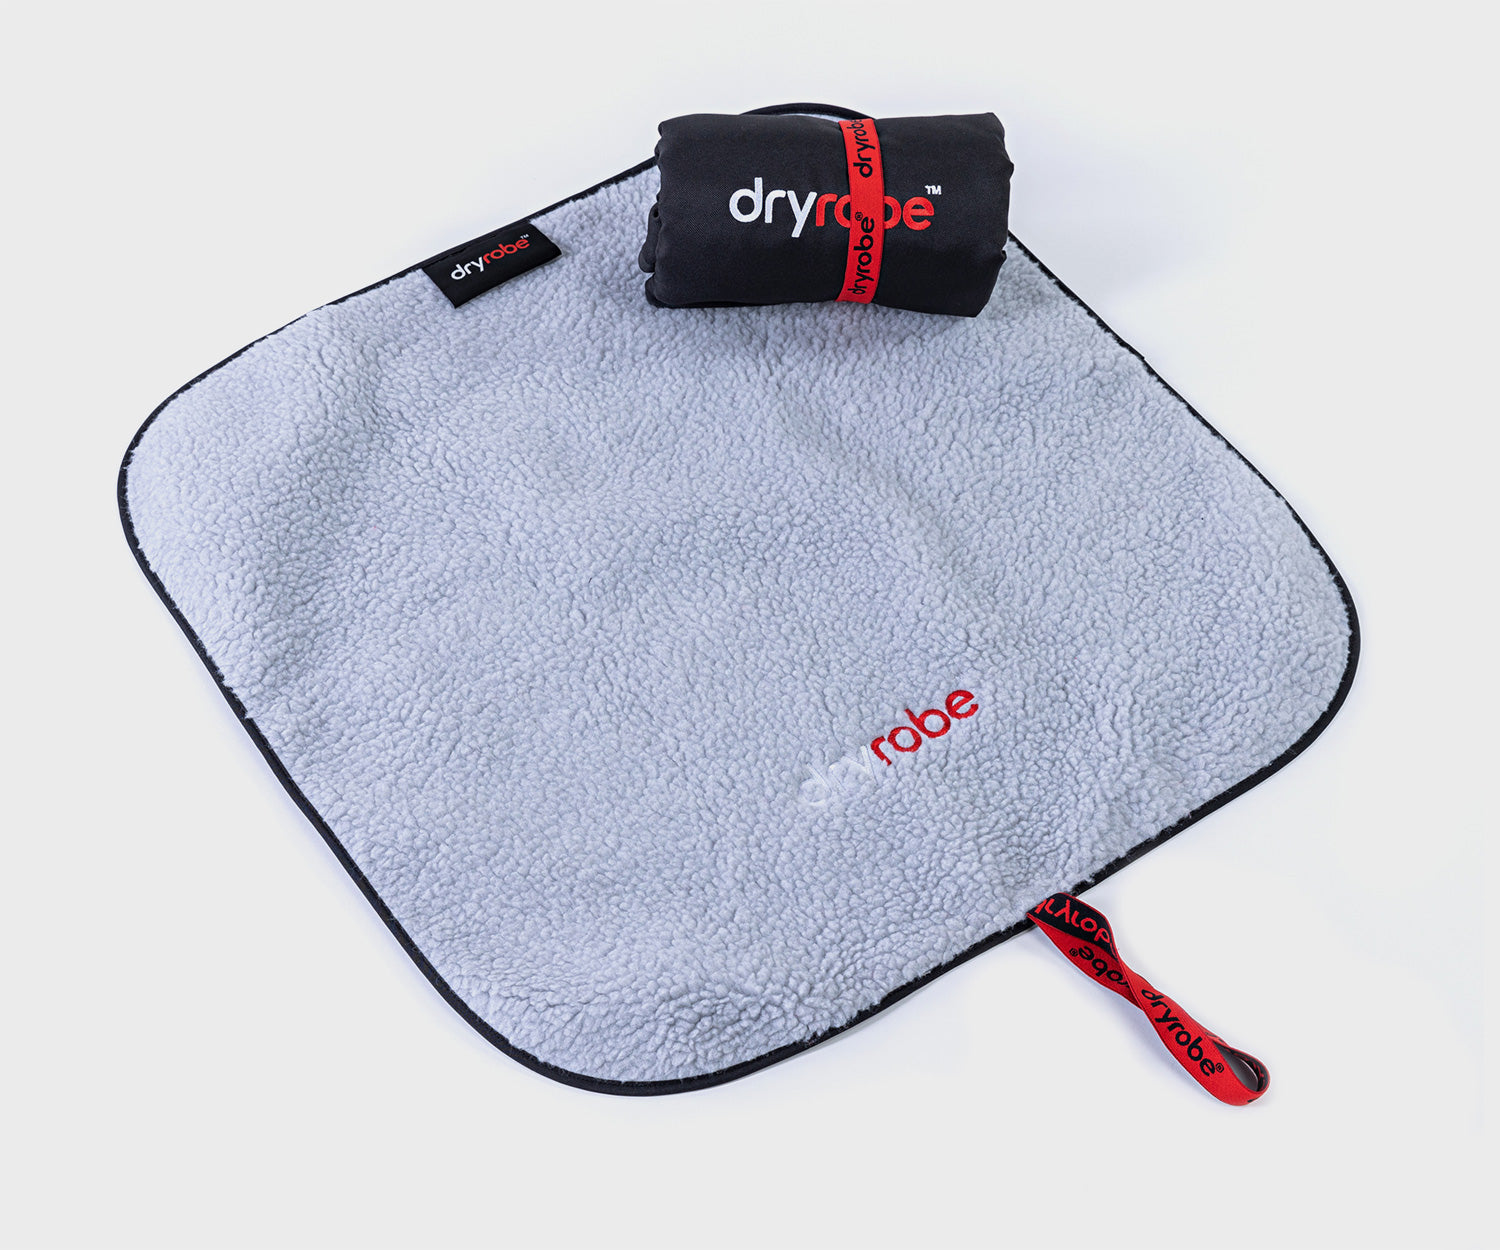 Dryrobe Changing Mat Packs Down Small for Easy Storage